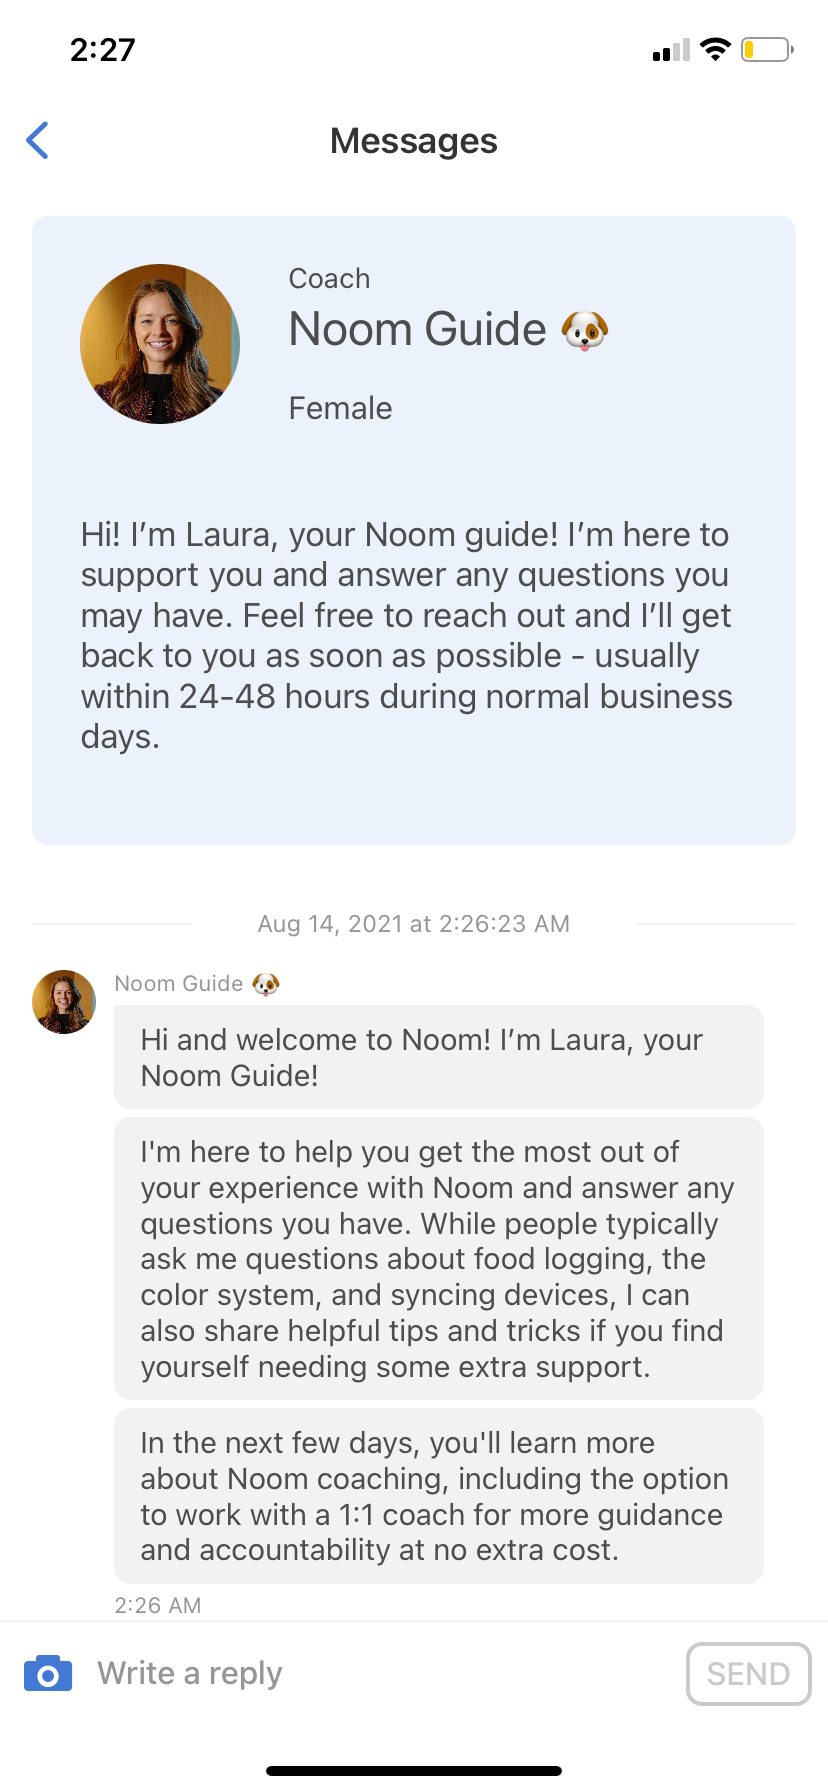 The Messages section of the Noom app, where a chat with the Noom guide has begun